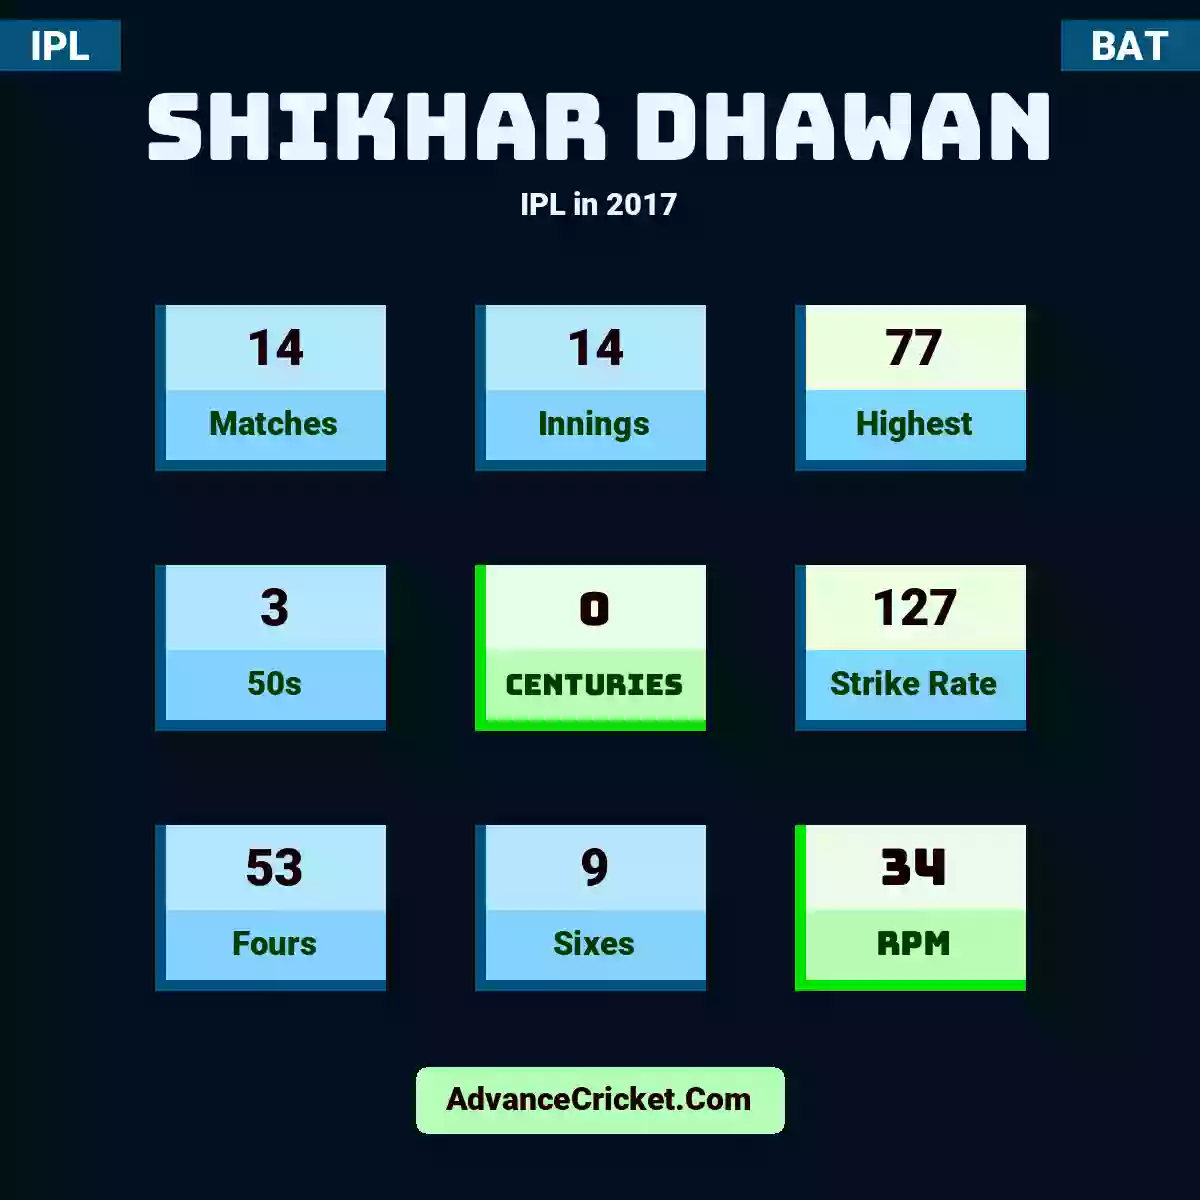 Shikhar Dhawan IPL  in 2017, Shikhar Dhawan played 14 matches, scored 77 runs as highest, 3 half-centuries, and 0 centuries, with a strike rate of 127. S.Dhawan hit 53 fours and 9 sixes, with an RPM of 34.